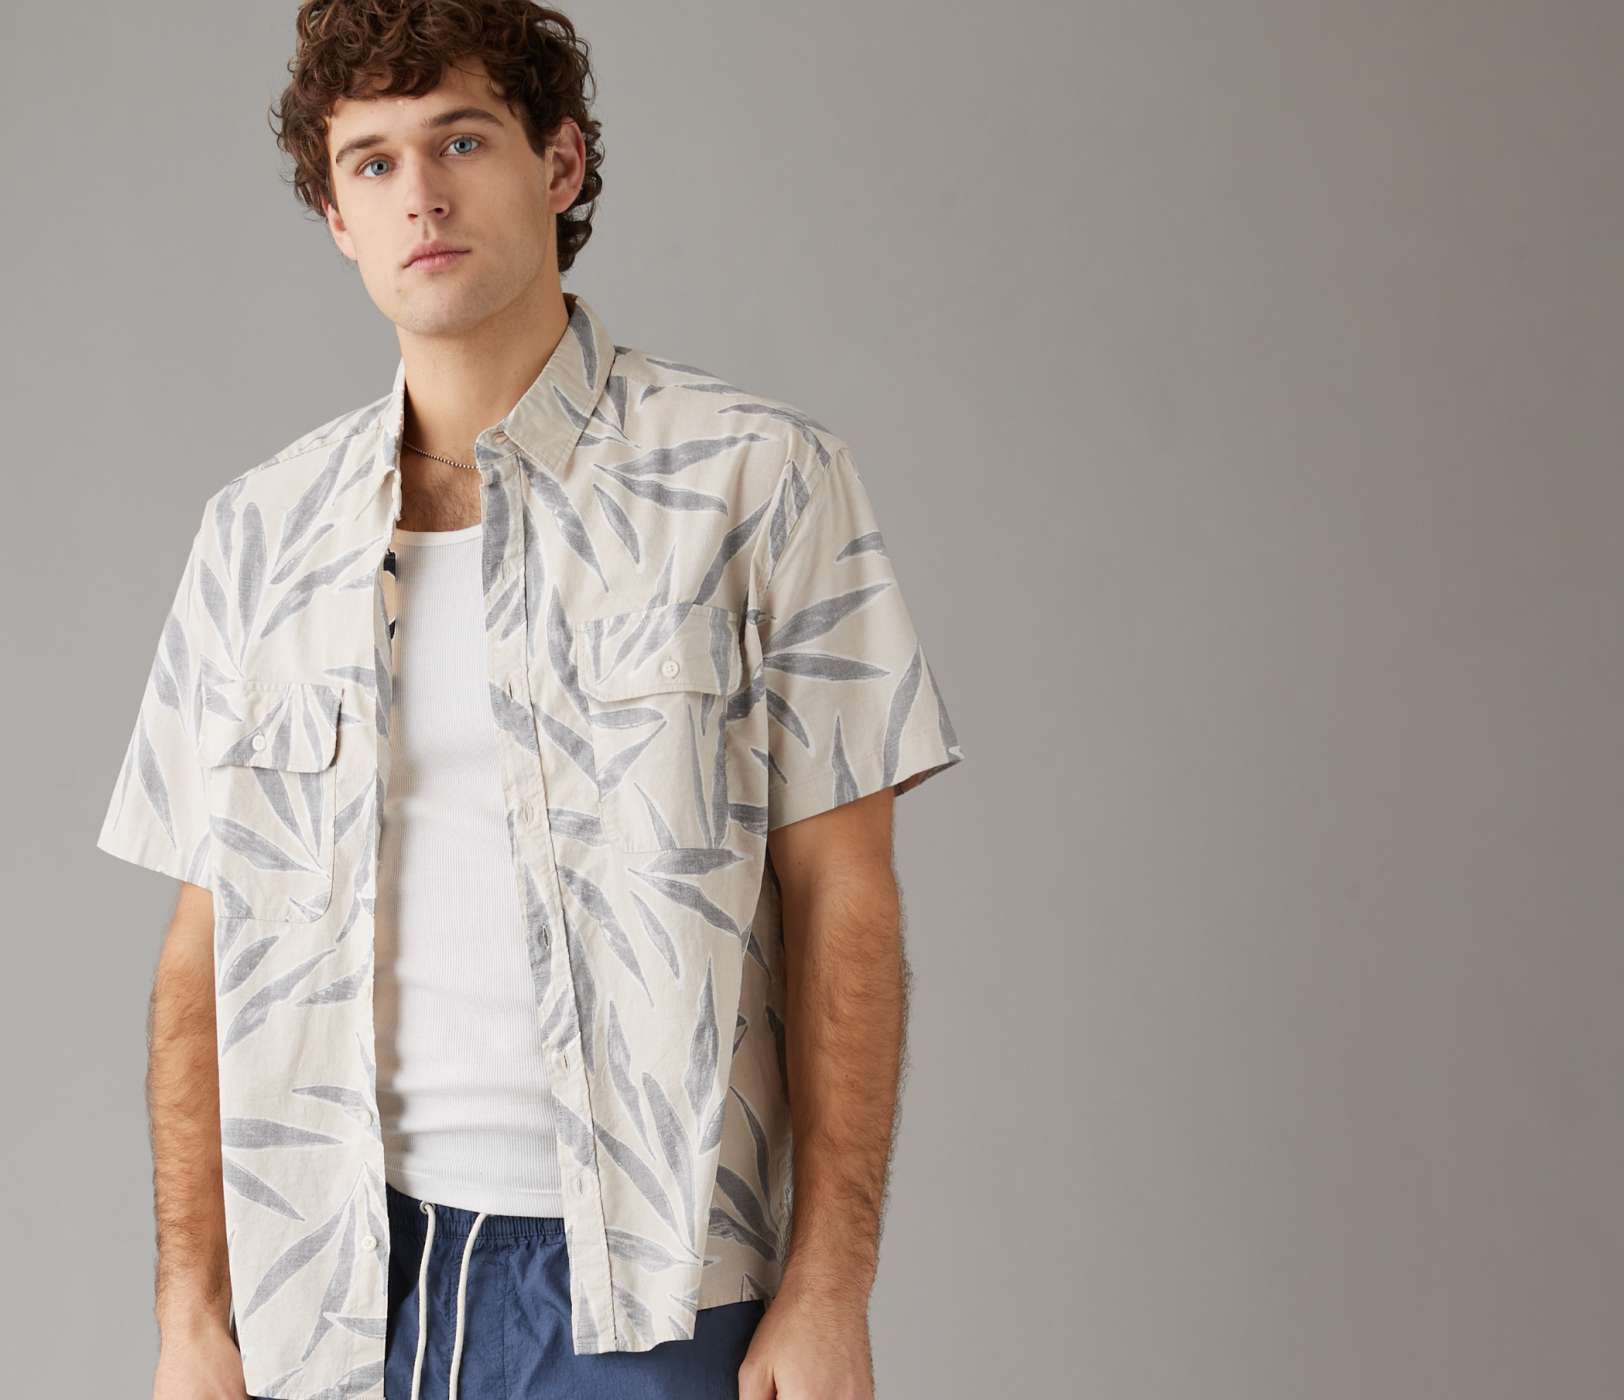 Men's Button-Up Shirts | American Eagle